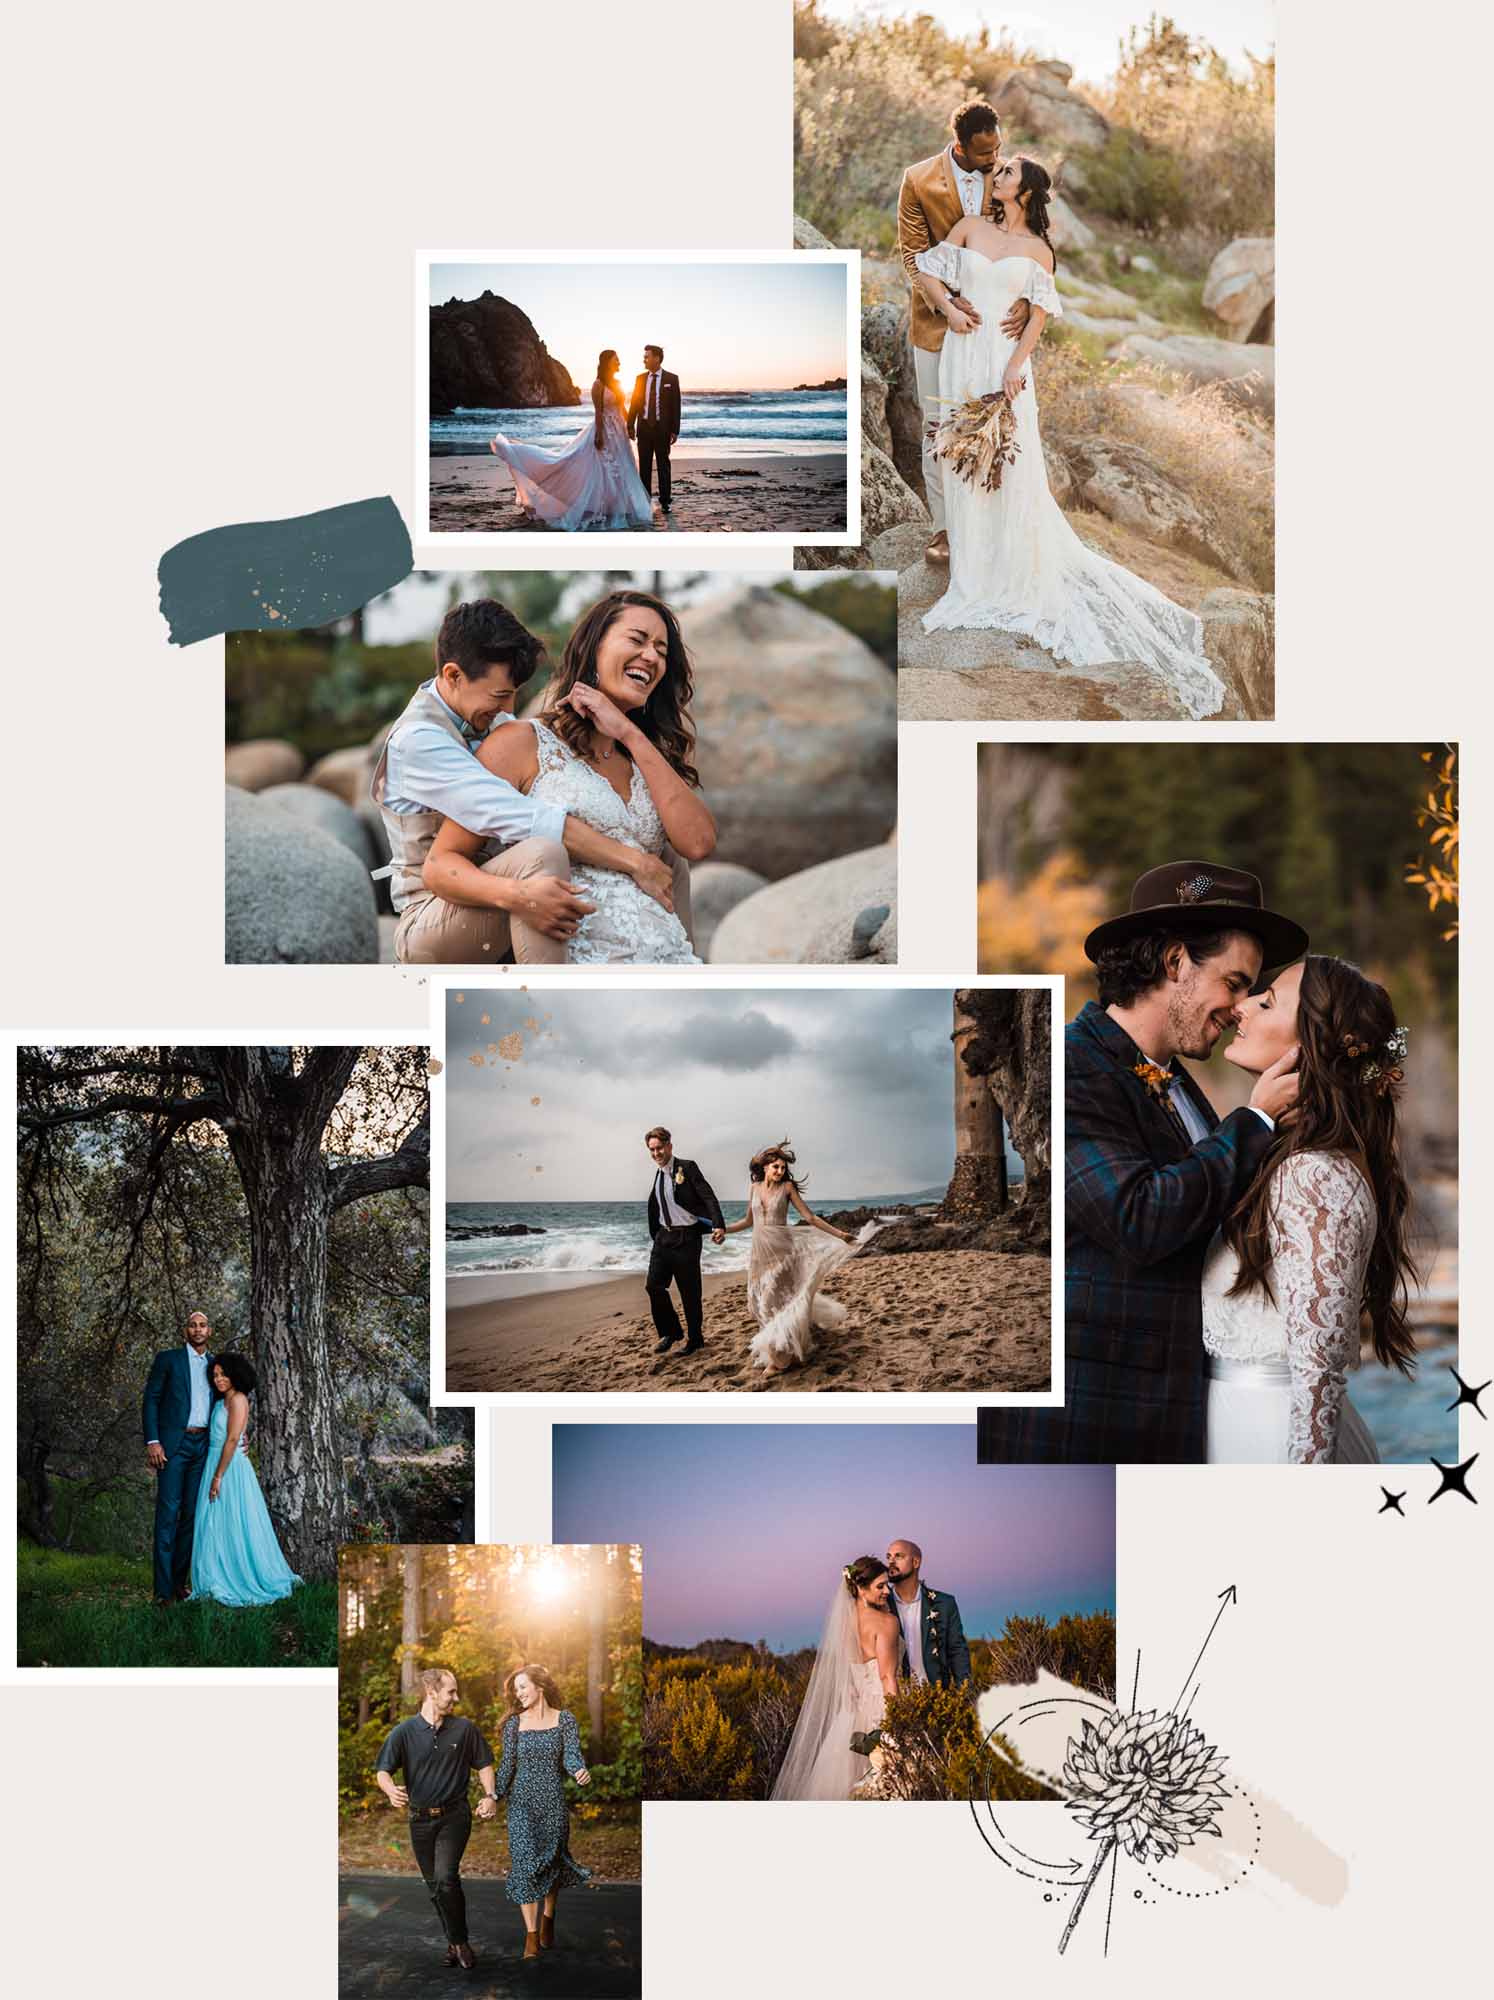 collage of couples on their wedding day embracing one another while enjoying their elopement wedding day